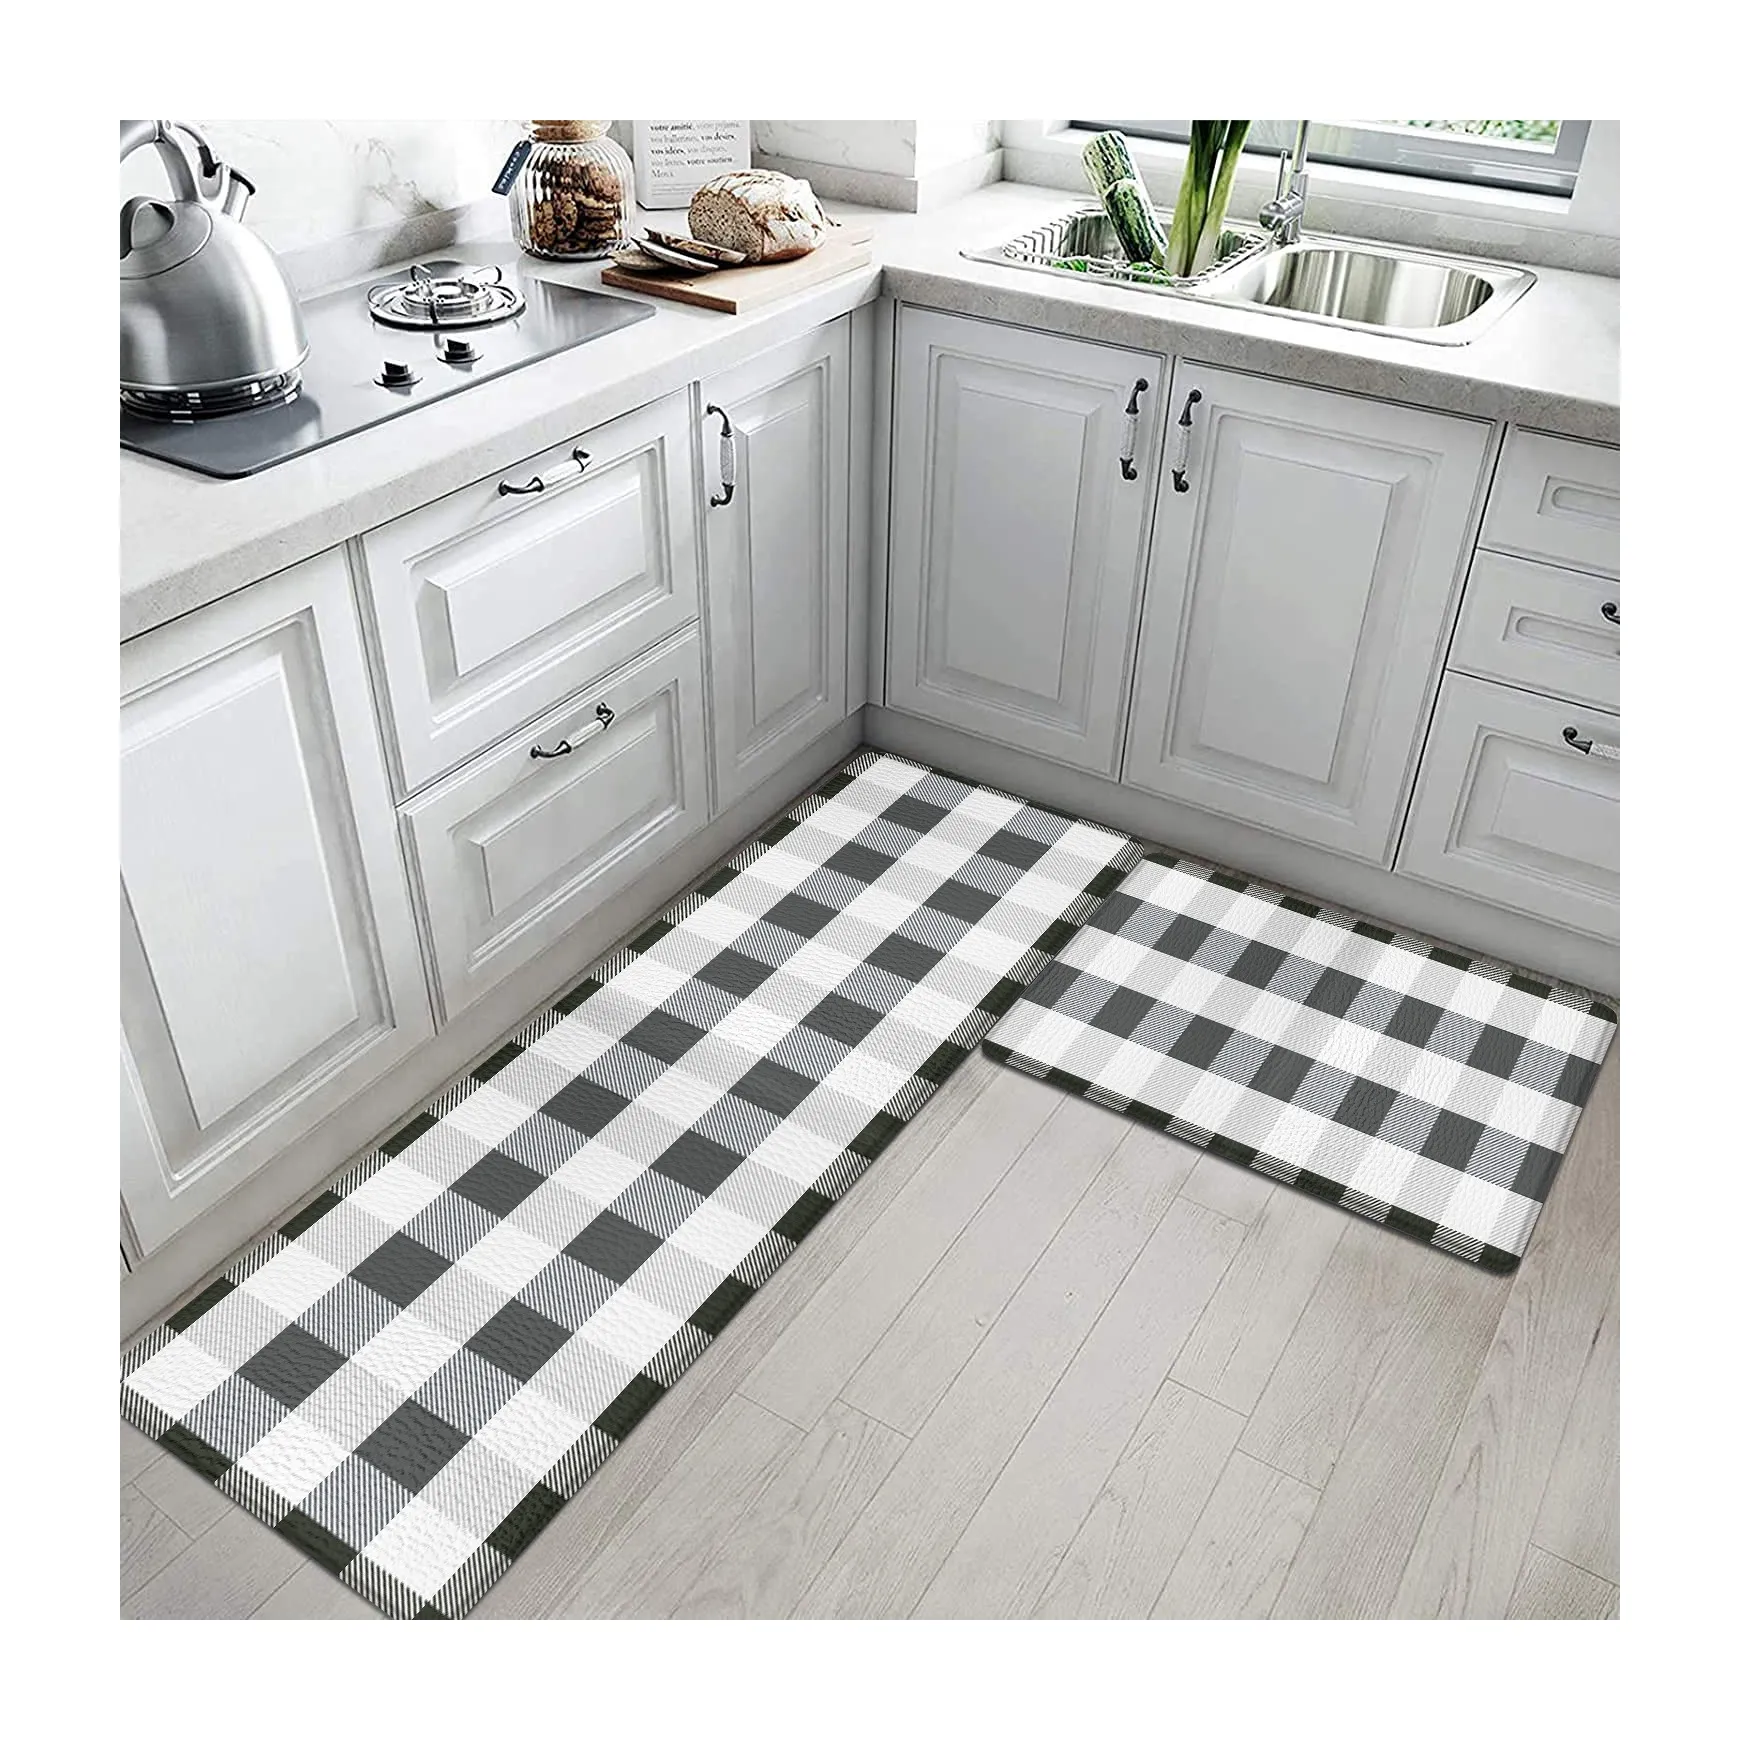 Amazon Simple Hot Sale Anti Fatigue Kitchen Mat PVC Leather Waterproof Oil Proof Easy Care Mat High Quality Novelty Carpet